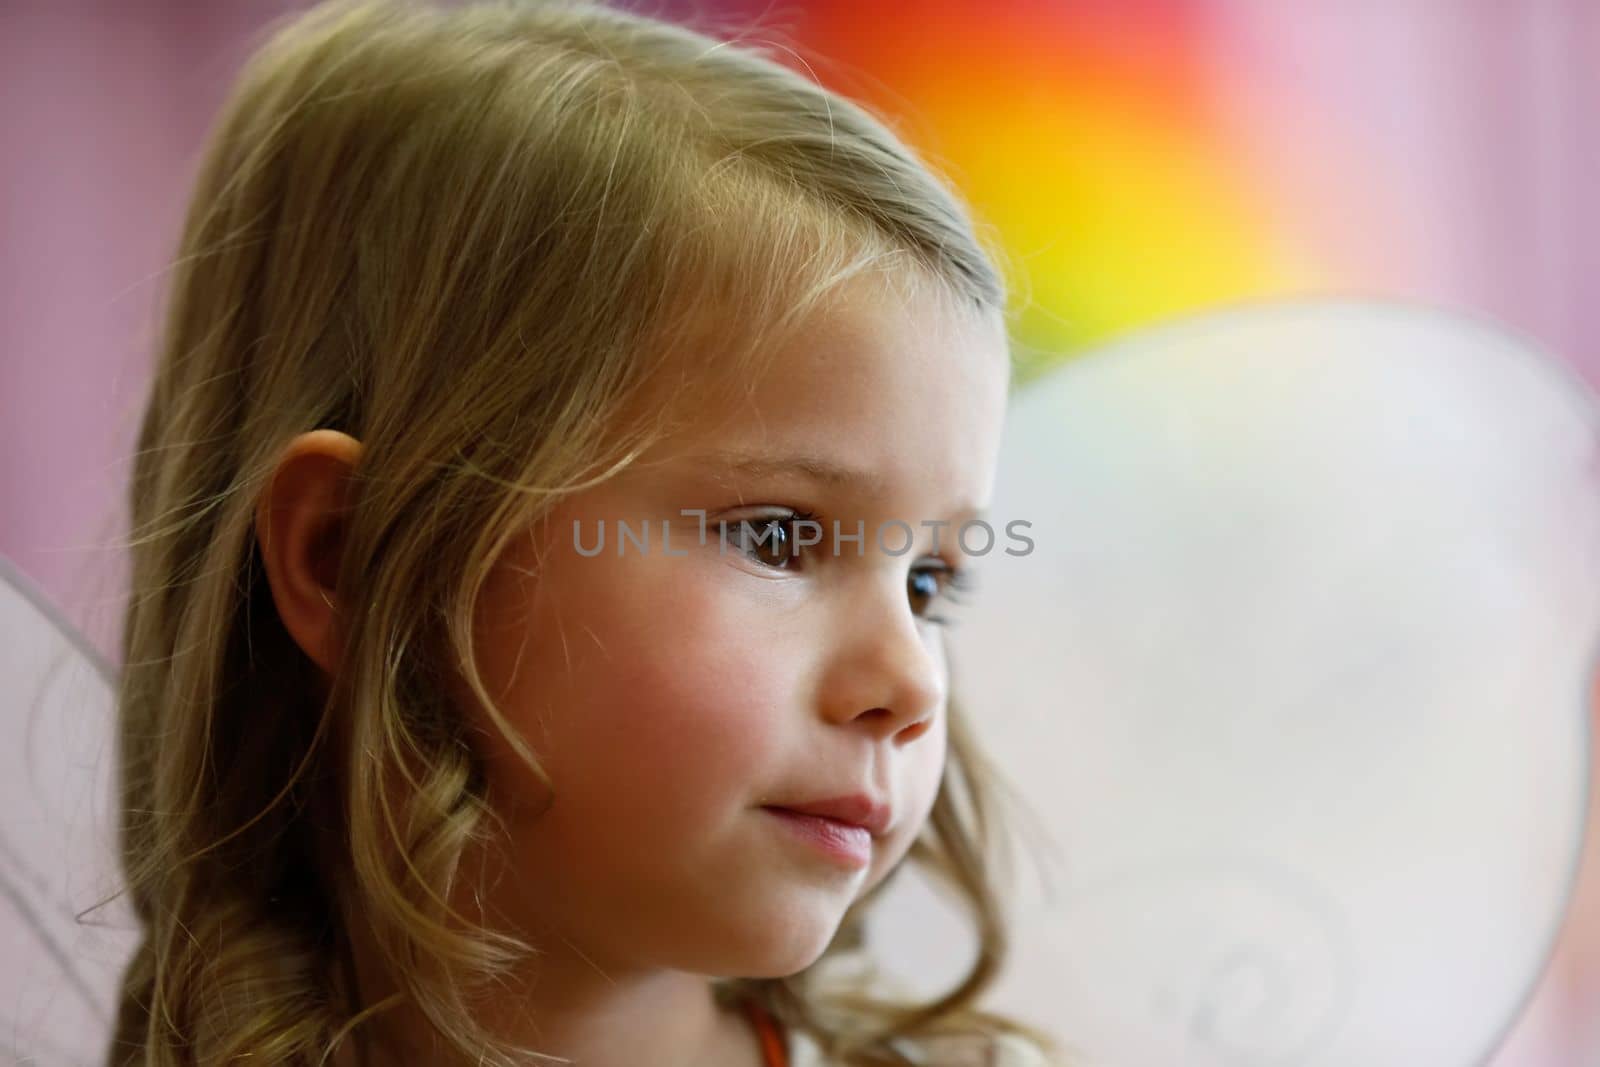 Belarus, city of Gomil, May 16, 2019. Morning in kindergarten.Close-up portrait of a little six-year-old girl.